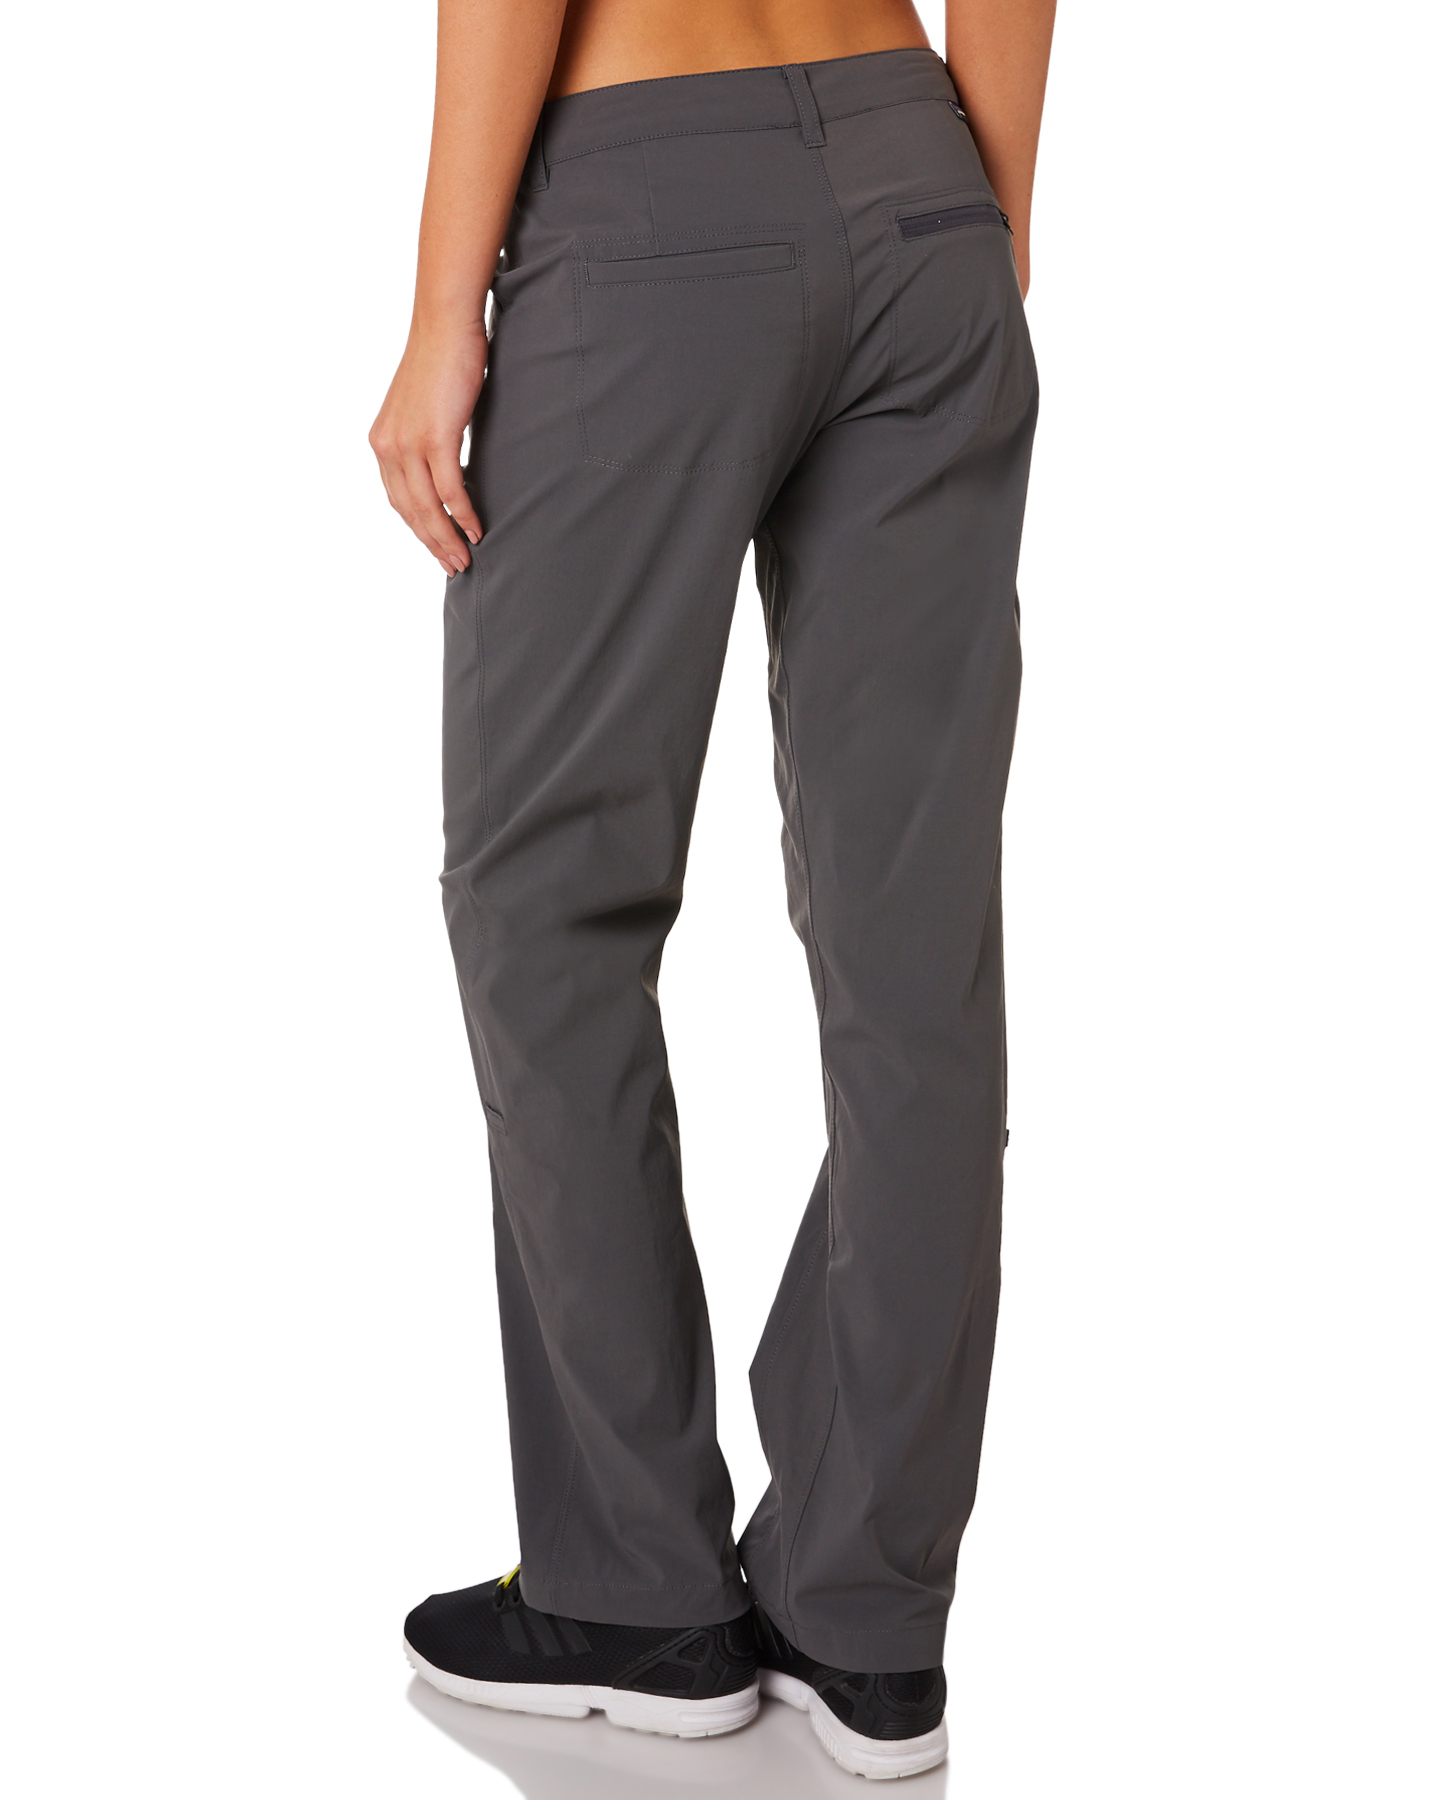 Patagonia Womens Quandary Pants - Forge Grey | SurfStitch